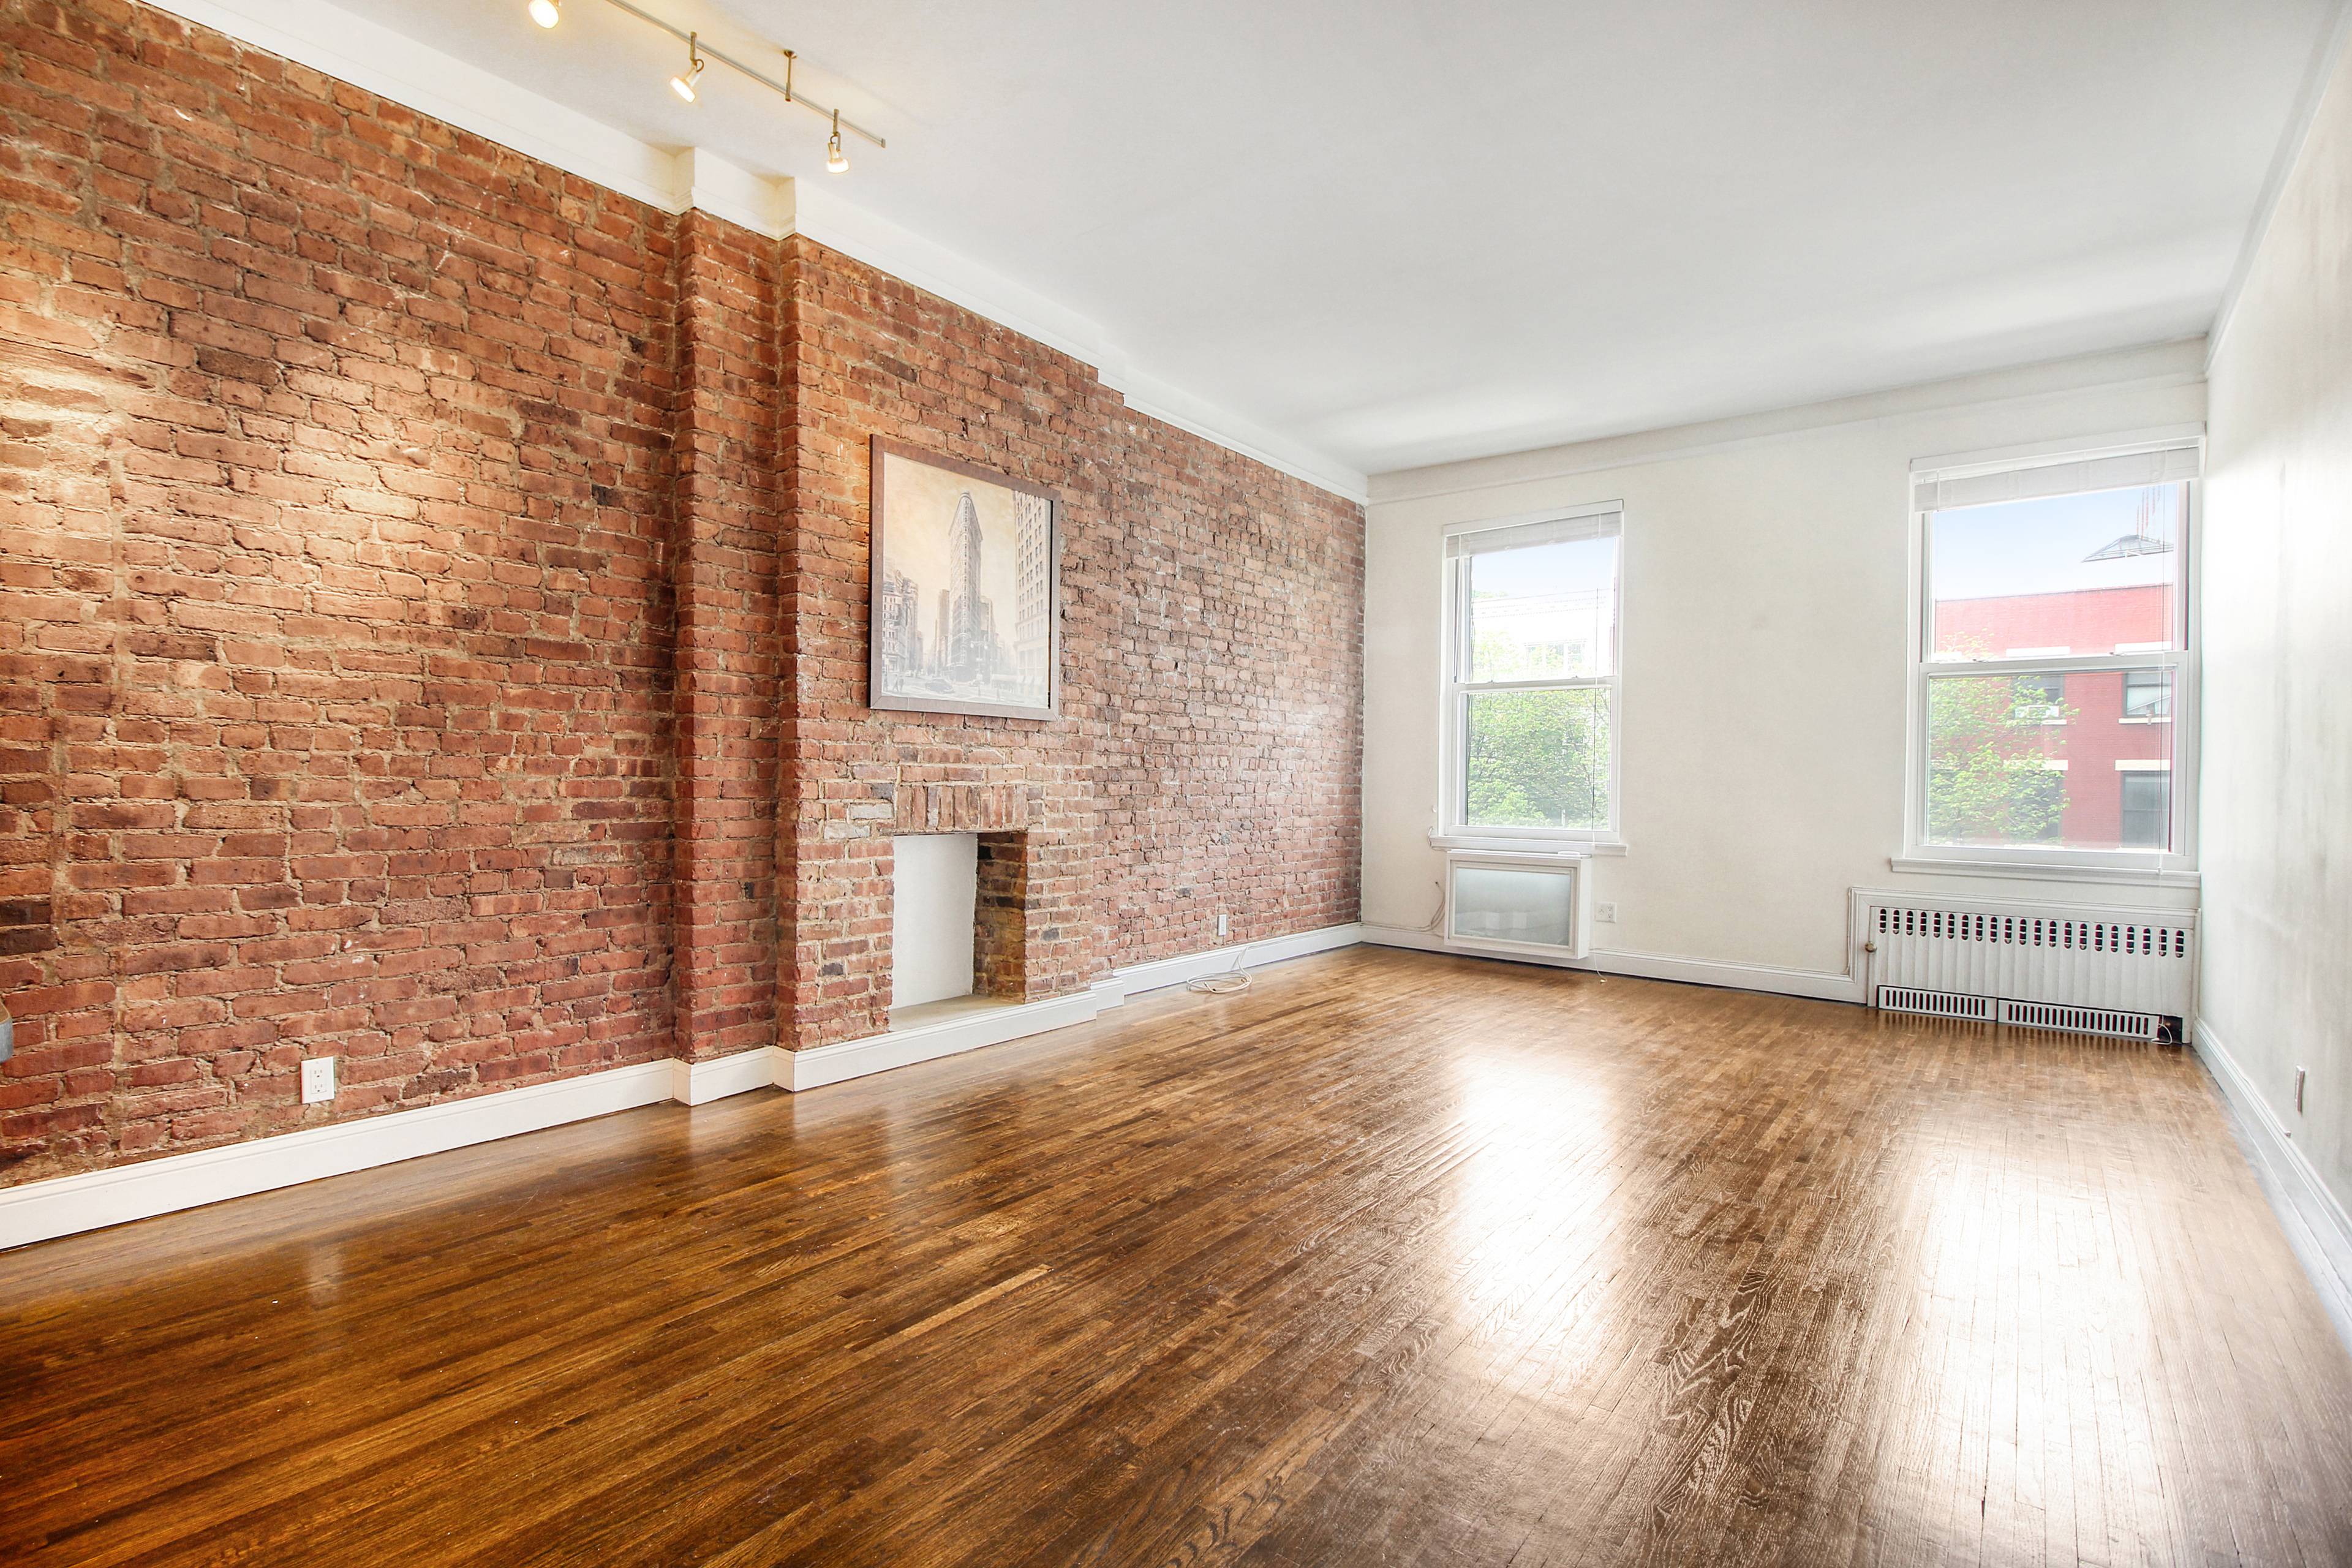 Renovated one bedroom apartment, located at the intersection of Chelsea, West Village, Union Square and the Meatpacking District.